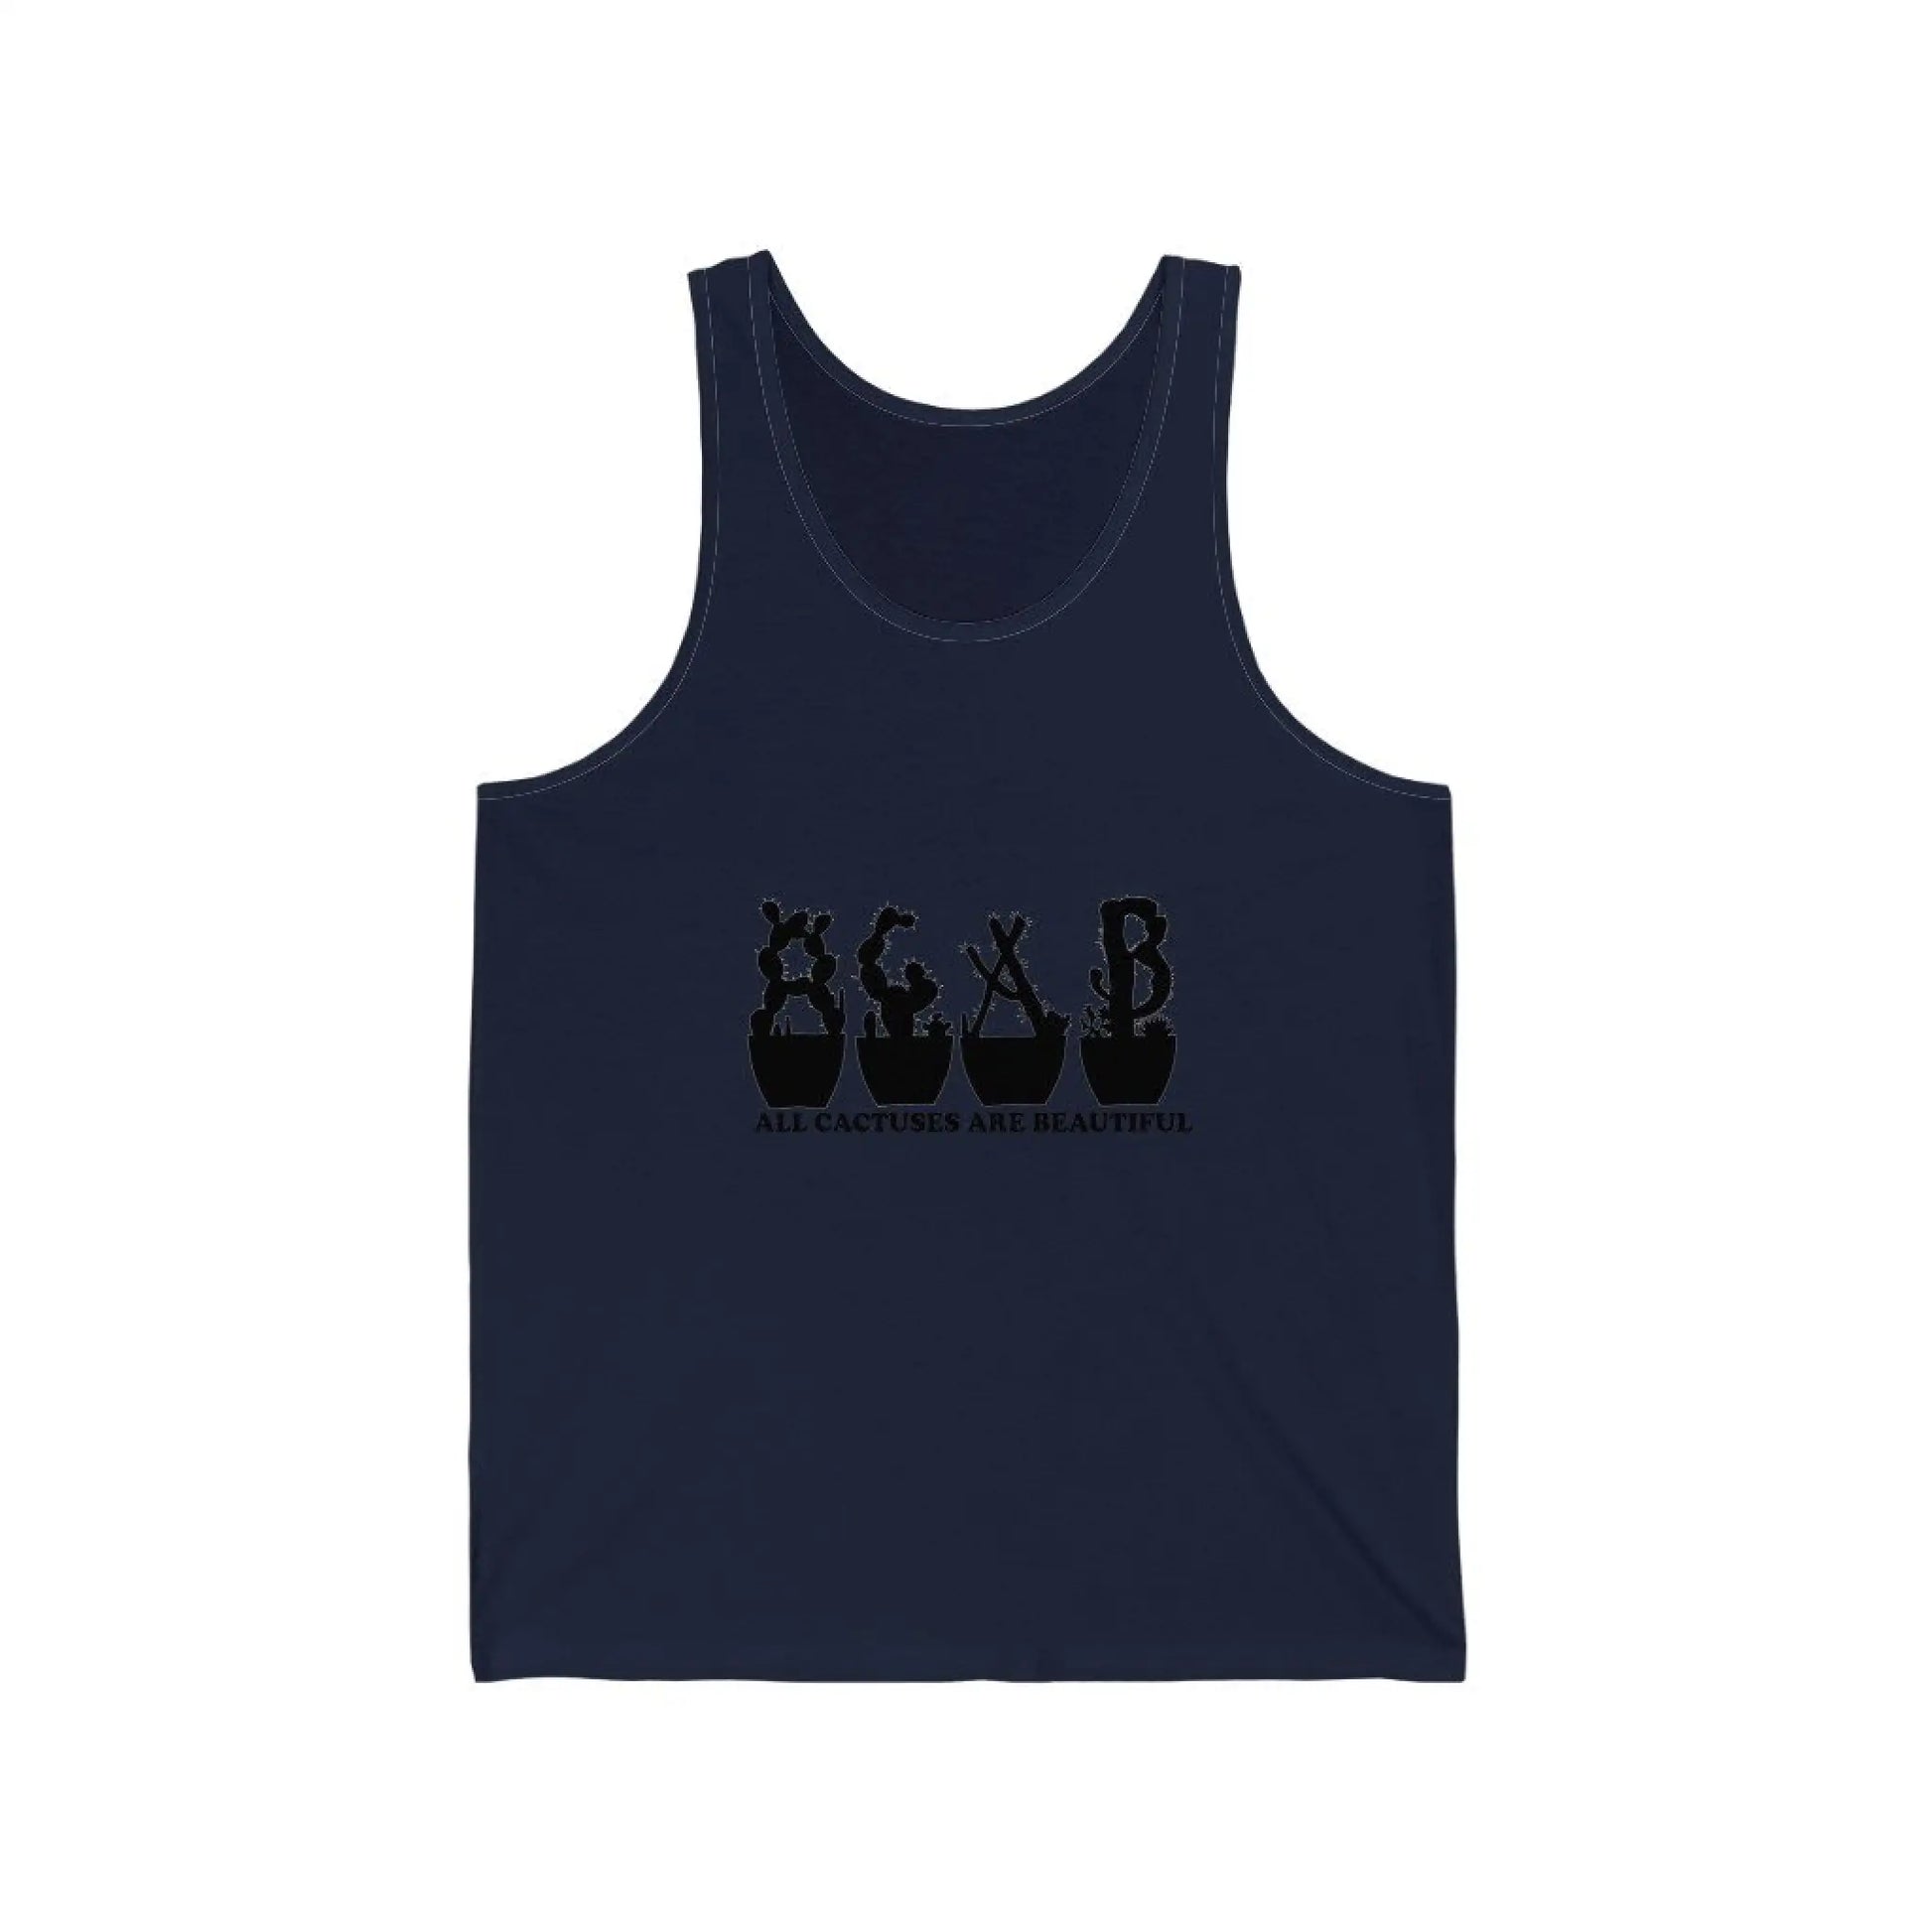 Unisex Jersey Tank - All Cactuses Are Beautiful - Navy / XS